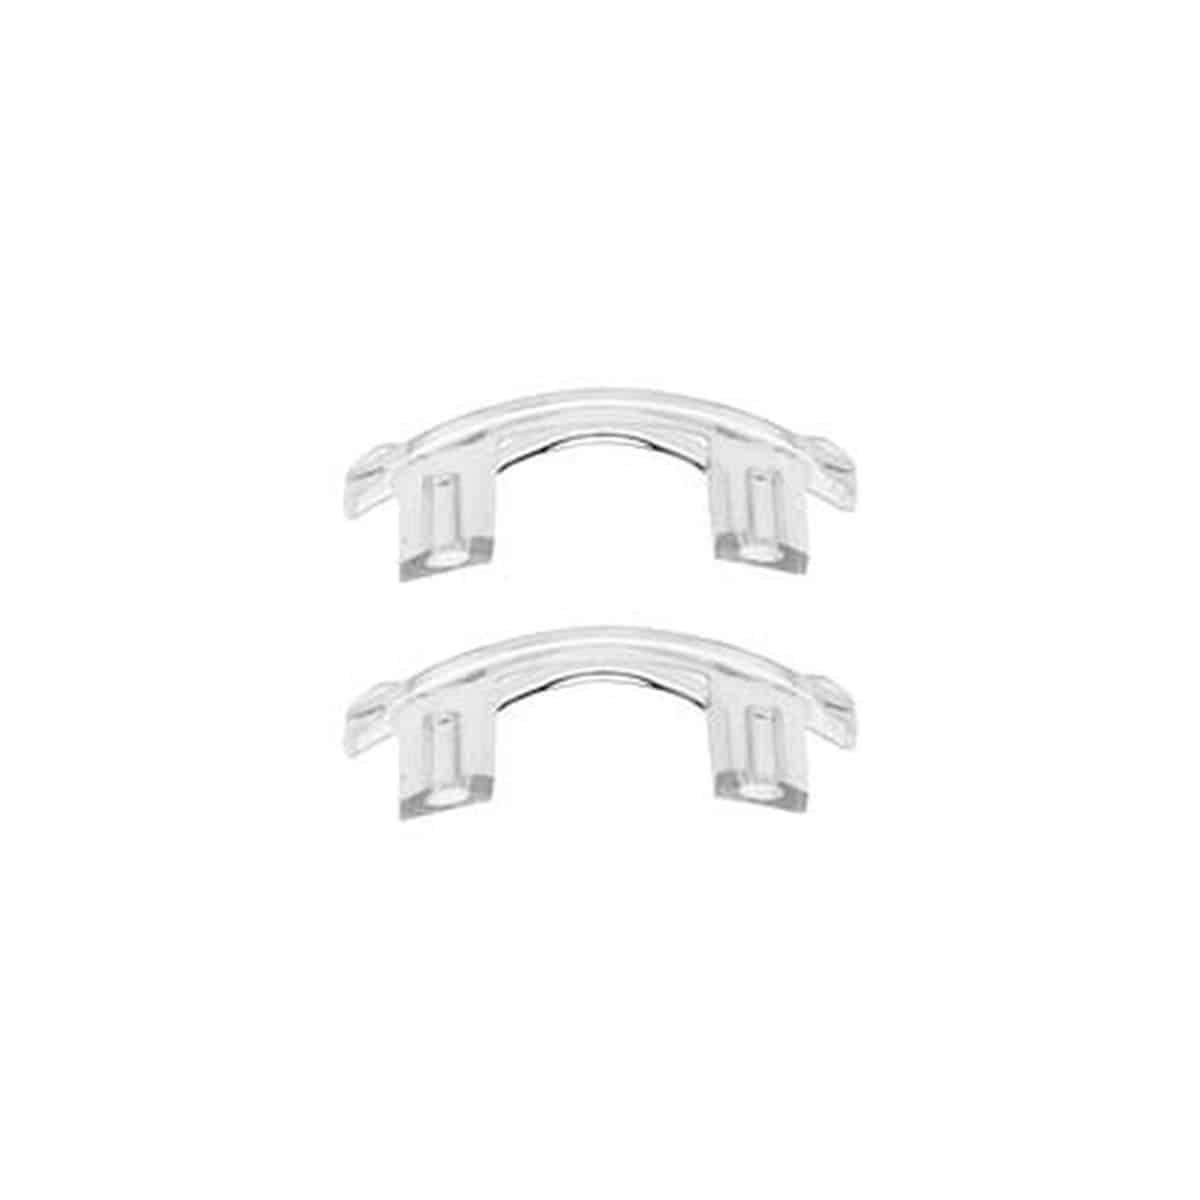 Featured image for “ResMed Mirage Quattro Ports Cap (2 pack)”